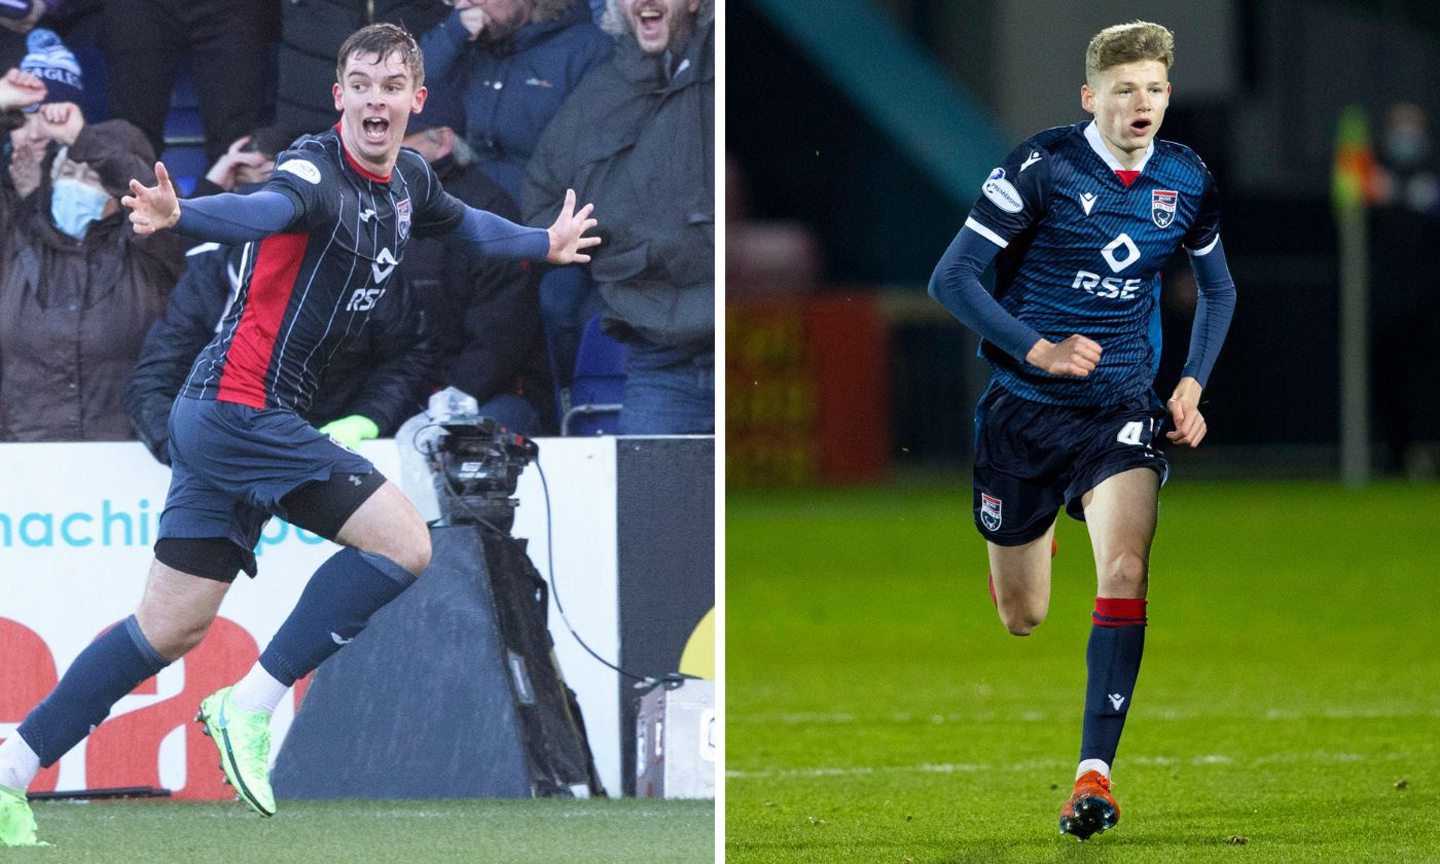 Matthew Right and Adam Mackinnon have joined Montrose on loan.